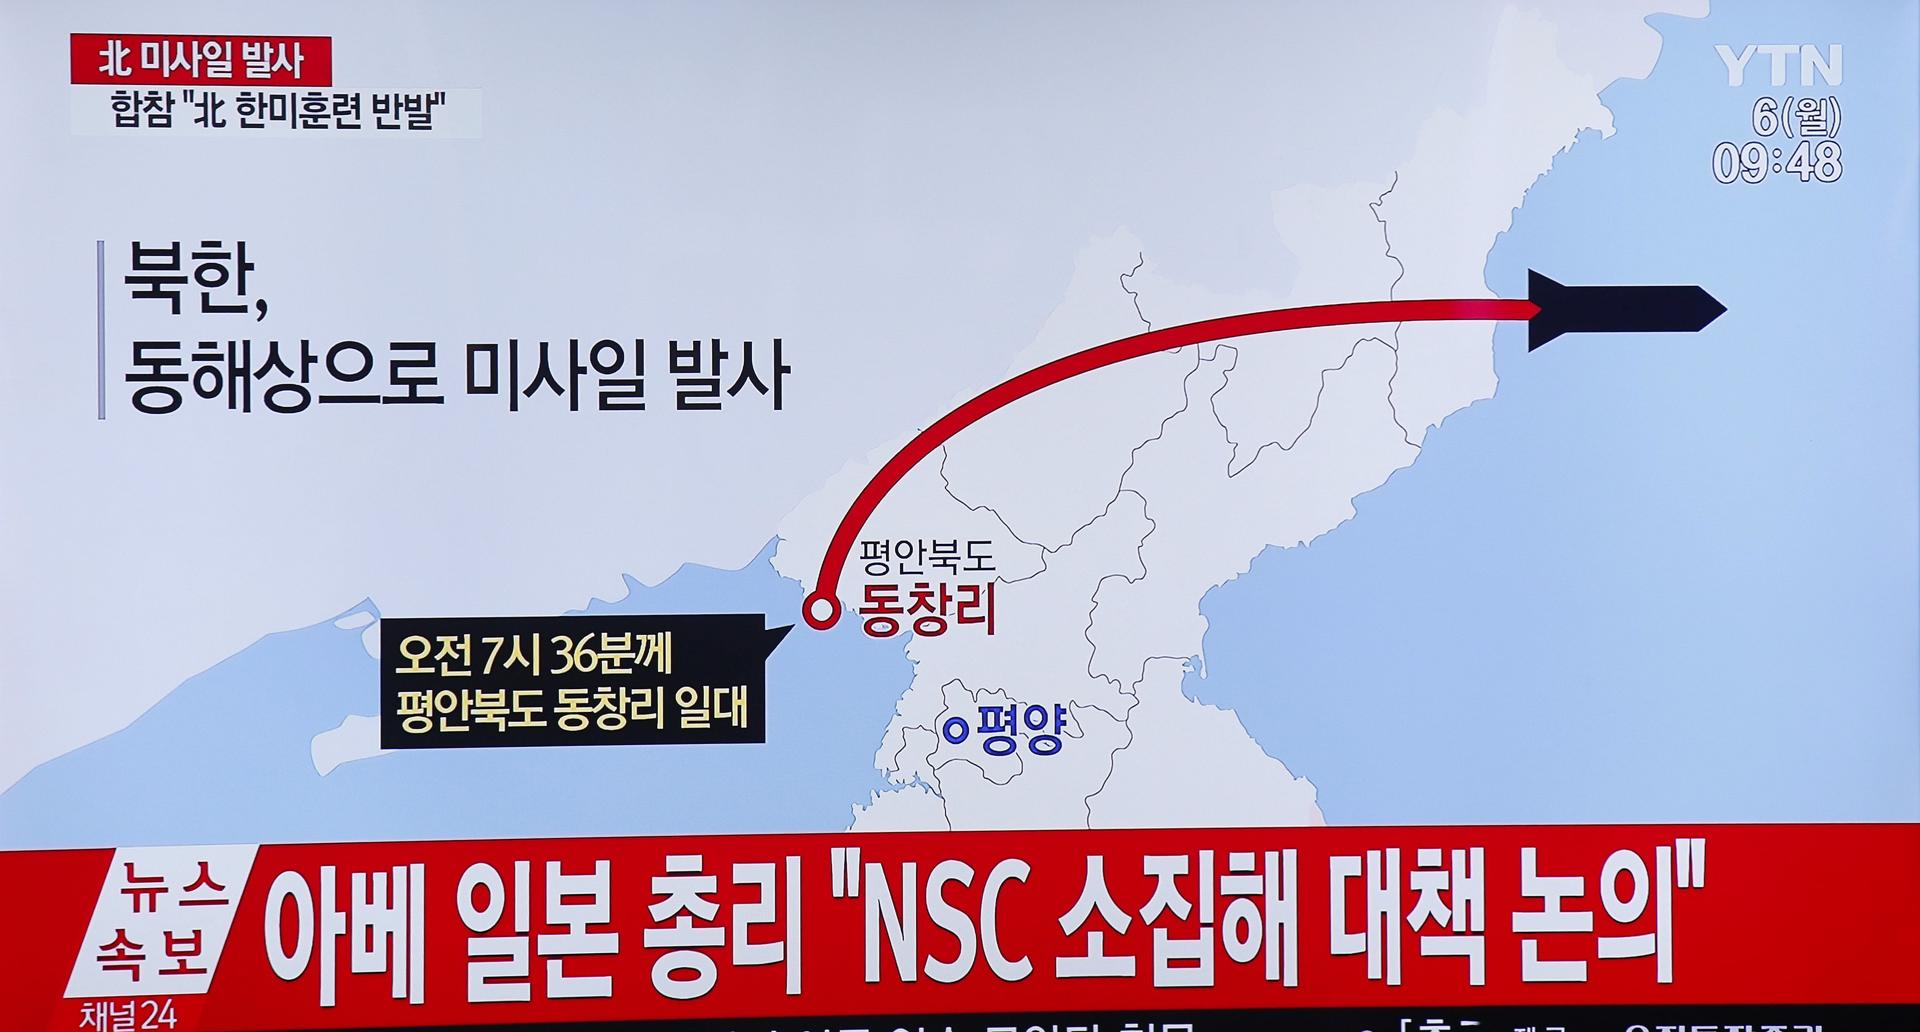 A television displays news broadcast's infographics reporting on North Korea test-firing ballistic missiles, at a station in Seoul, South Korea, 06 March 2017. EFE-EPA/KIM HEE-CHUL/FILE